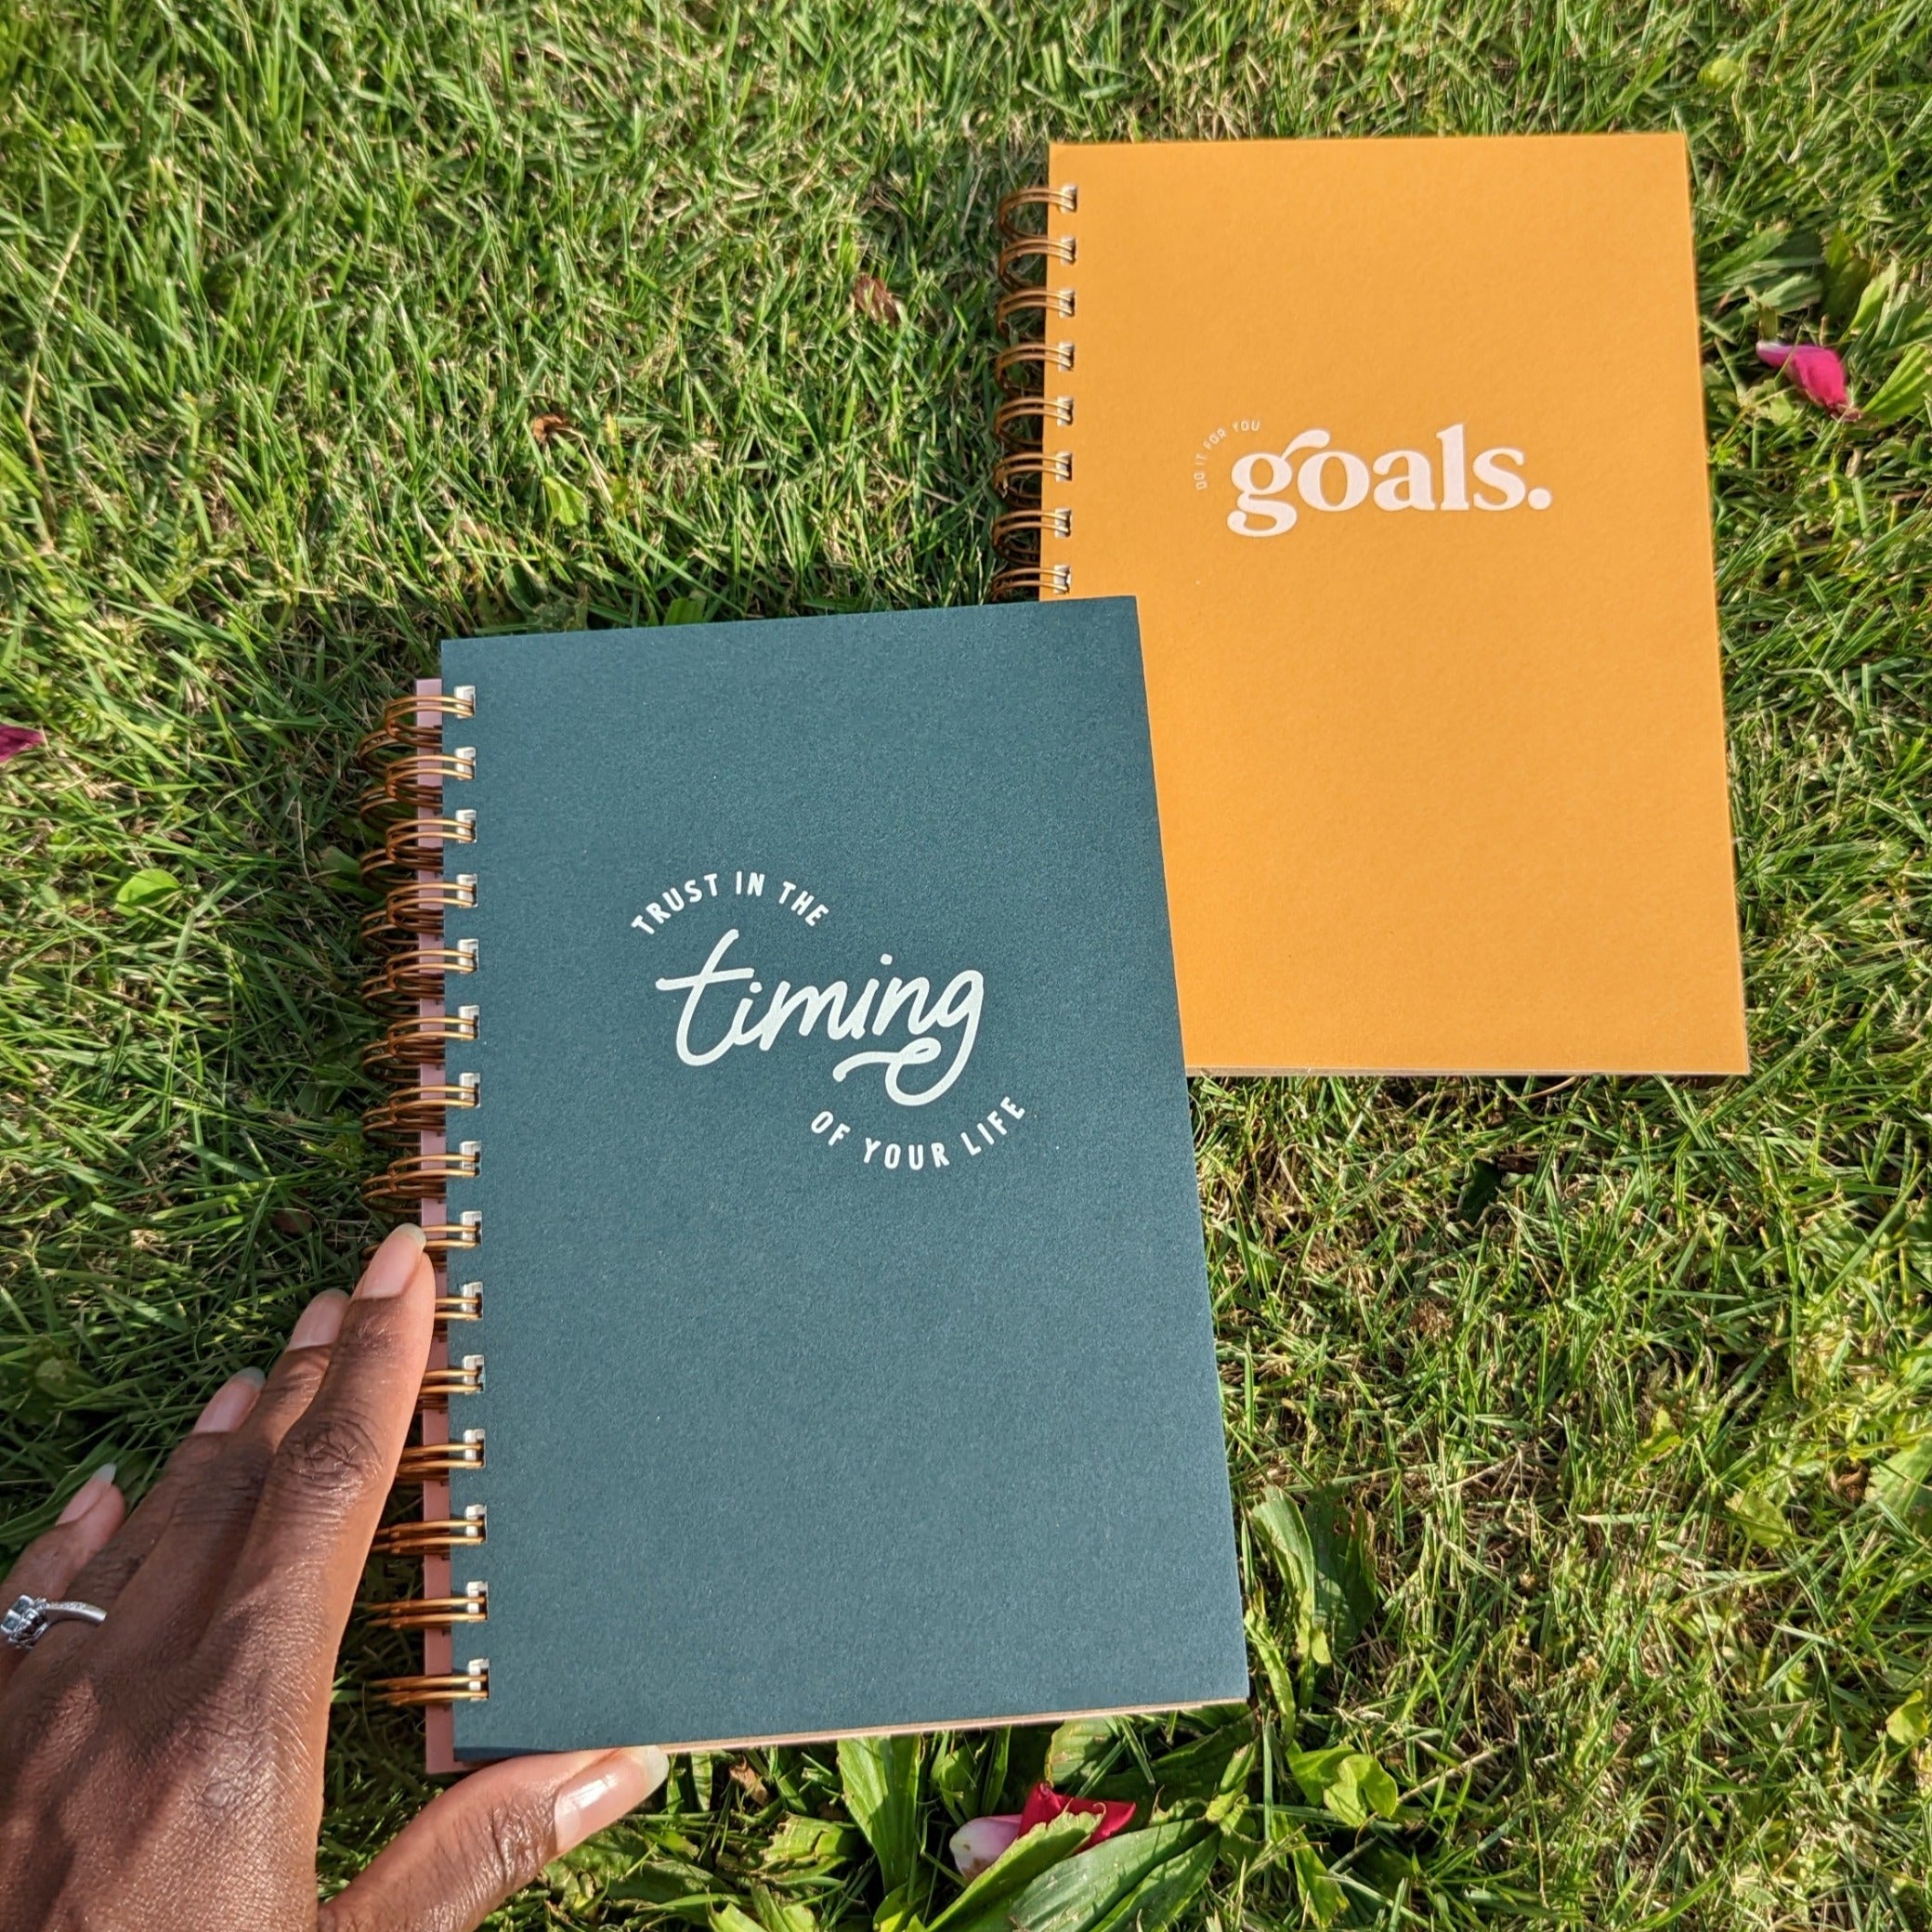 Lie among the grass with us, as pictured, to unpack your mind within Trust in the Timing of Your Life Journal Planner or Do it For the Goals Journal Planner. 